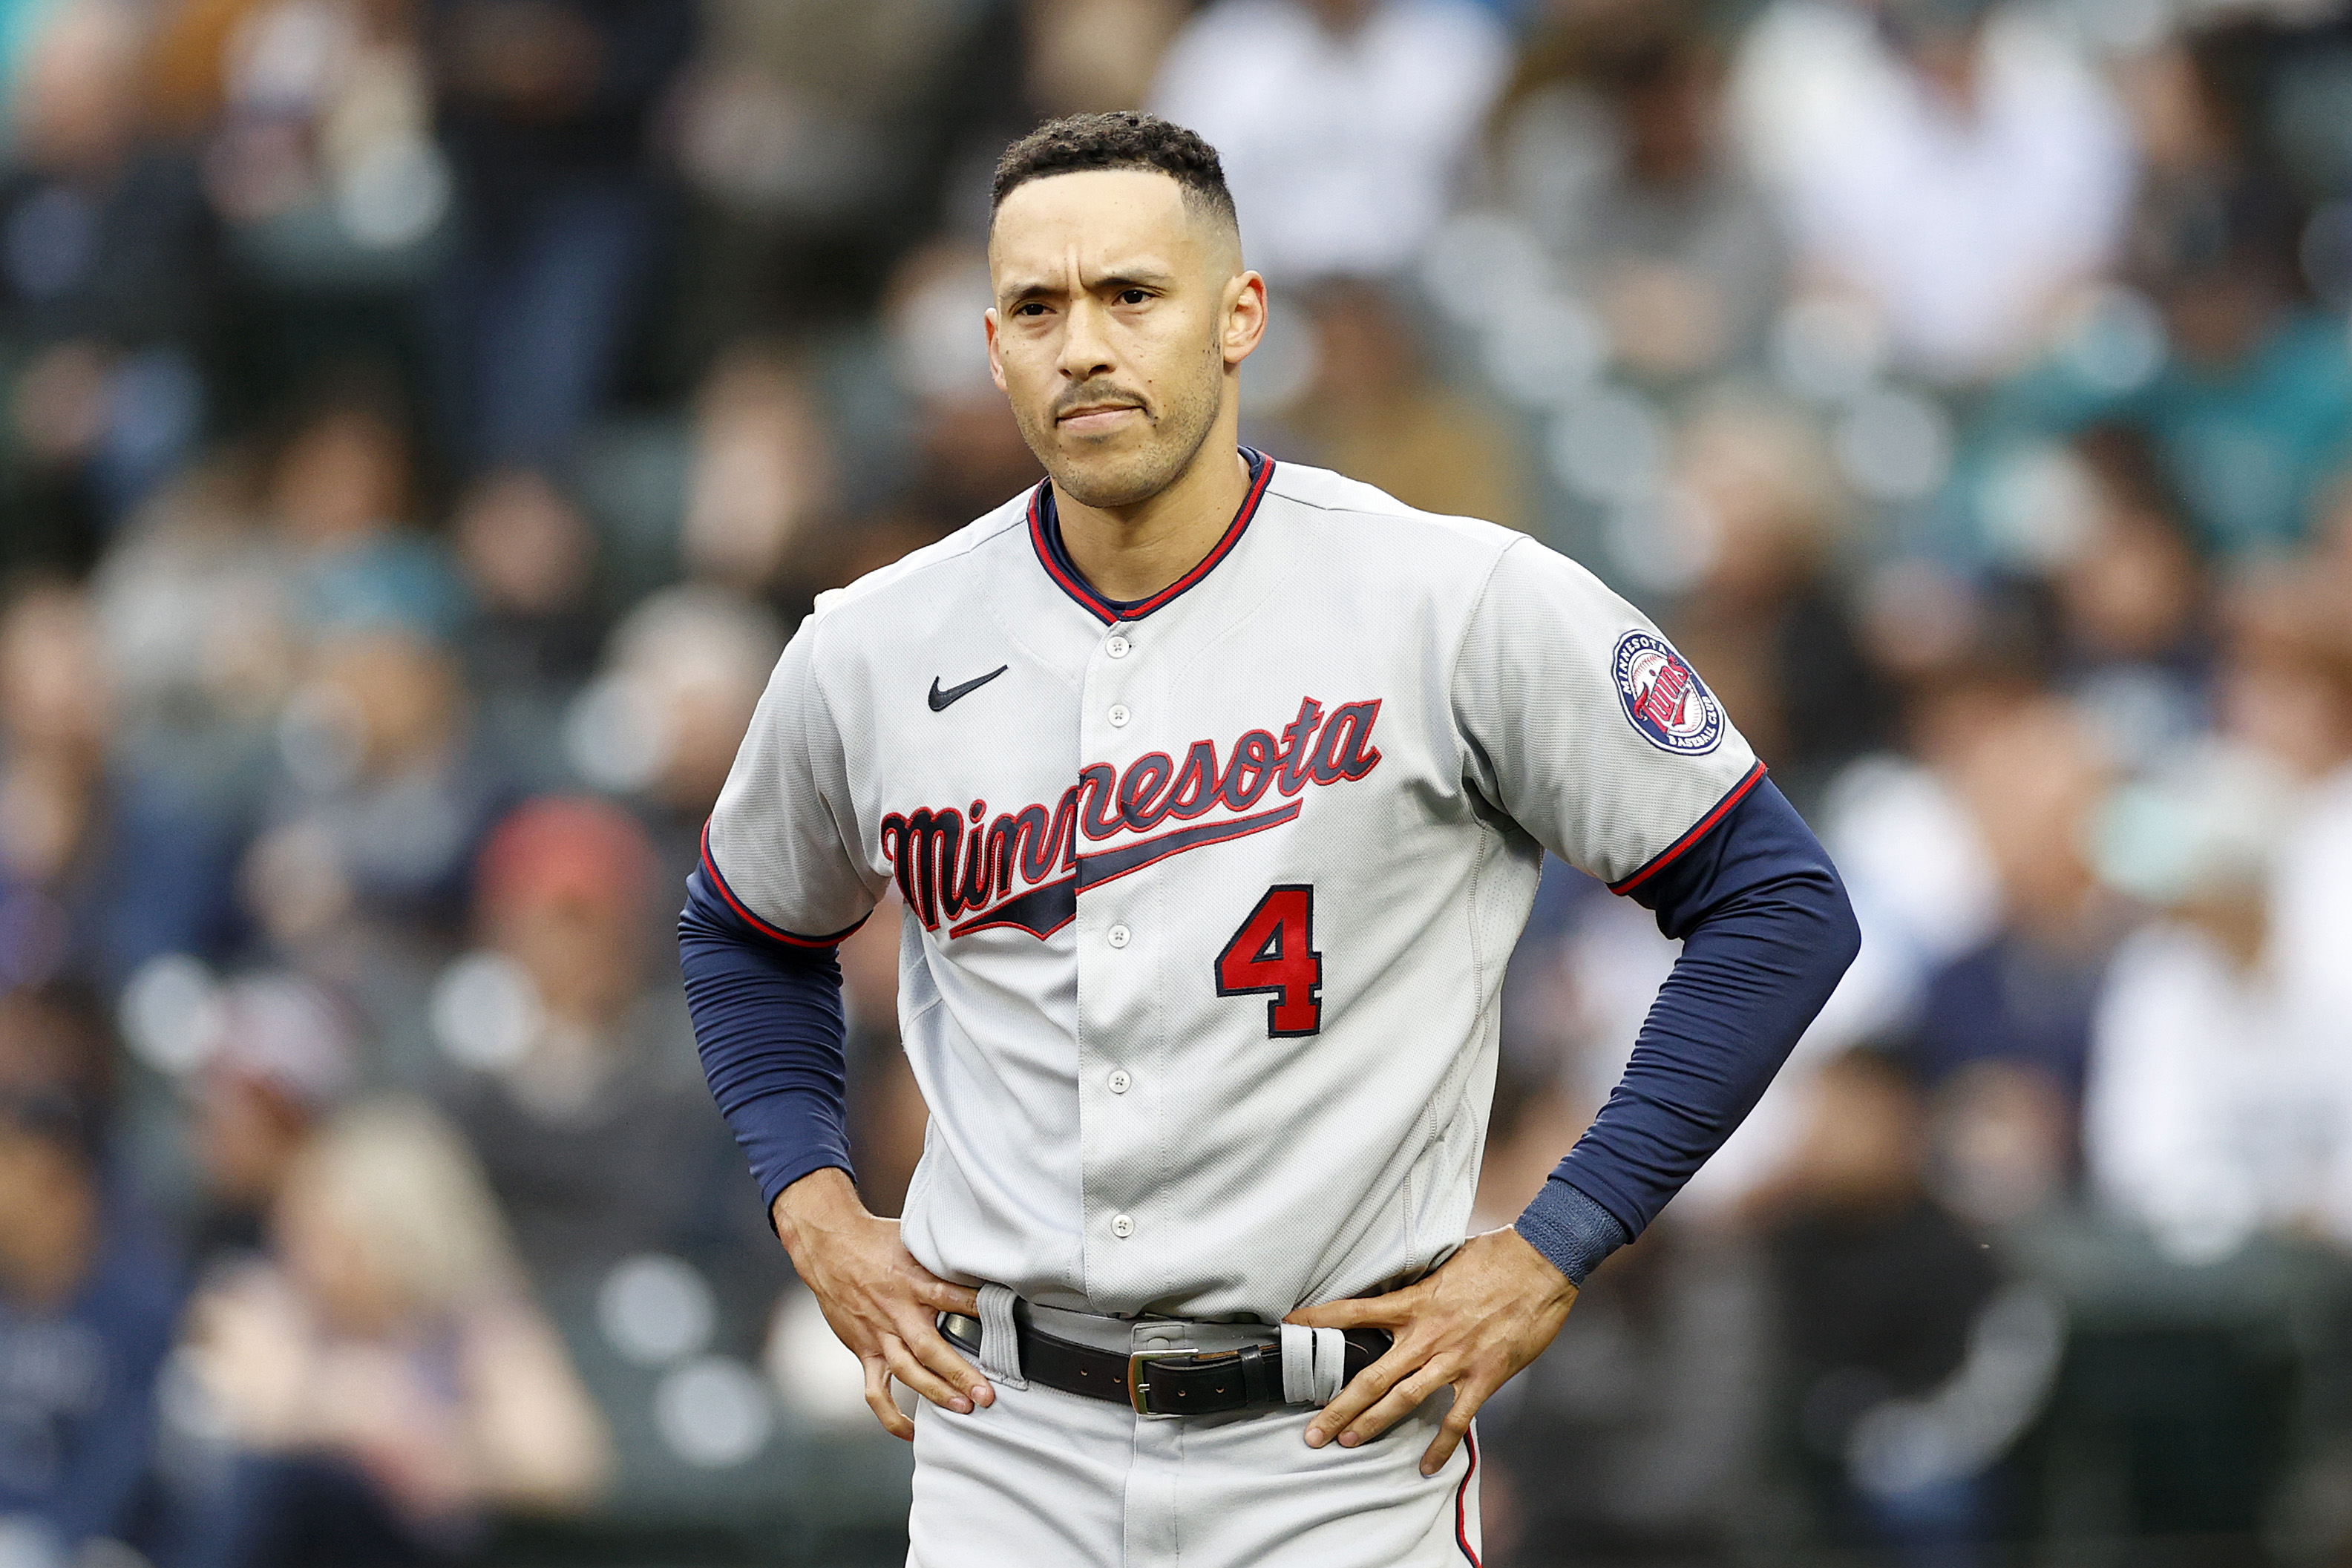 SEATTLE, WASHINGTON - JUNE 14: Carlos Correa #4 of the Minnesota Twins looks on during the game against the Seattle Mariners at T-Mobile Park on June 14, 2022 in Seattle, Washington.